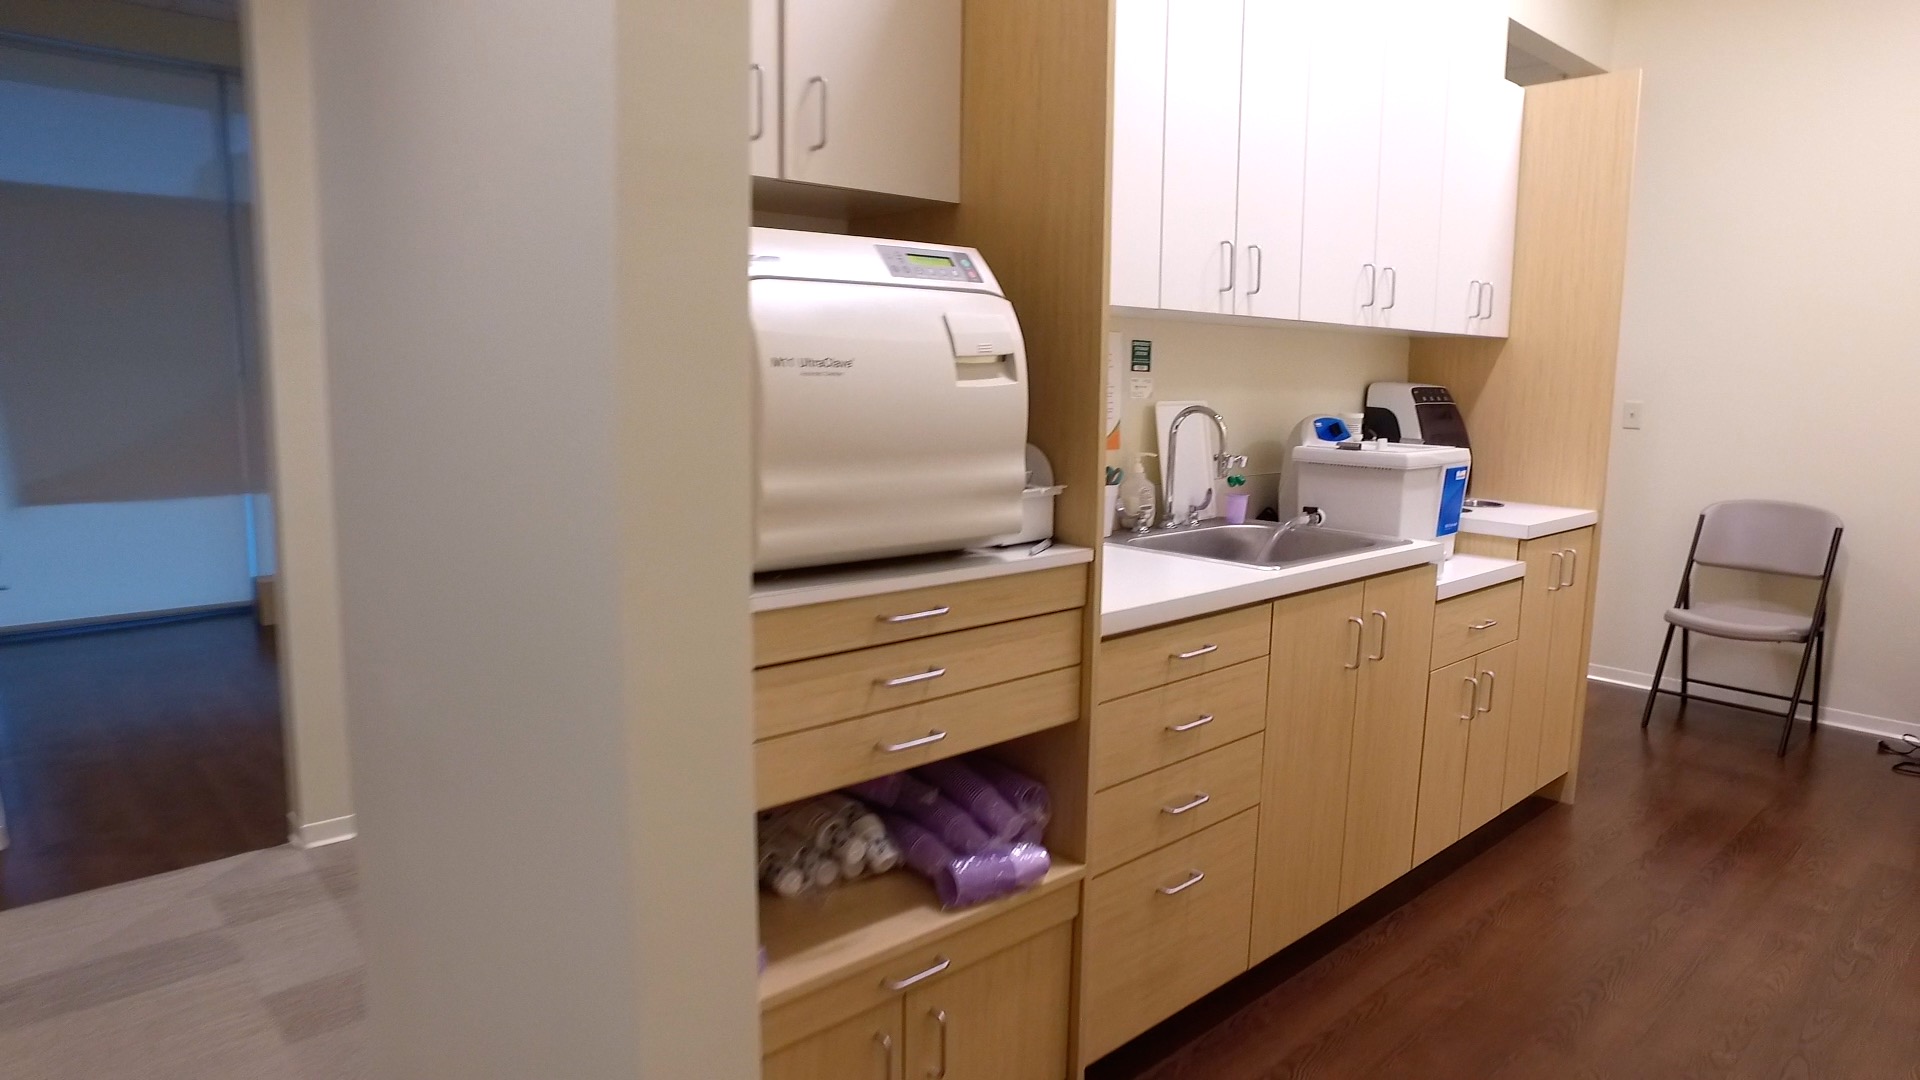 Sterilization Center Area [VIDEO] – Is It The New “Gloves?”